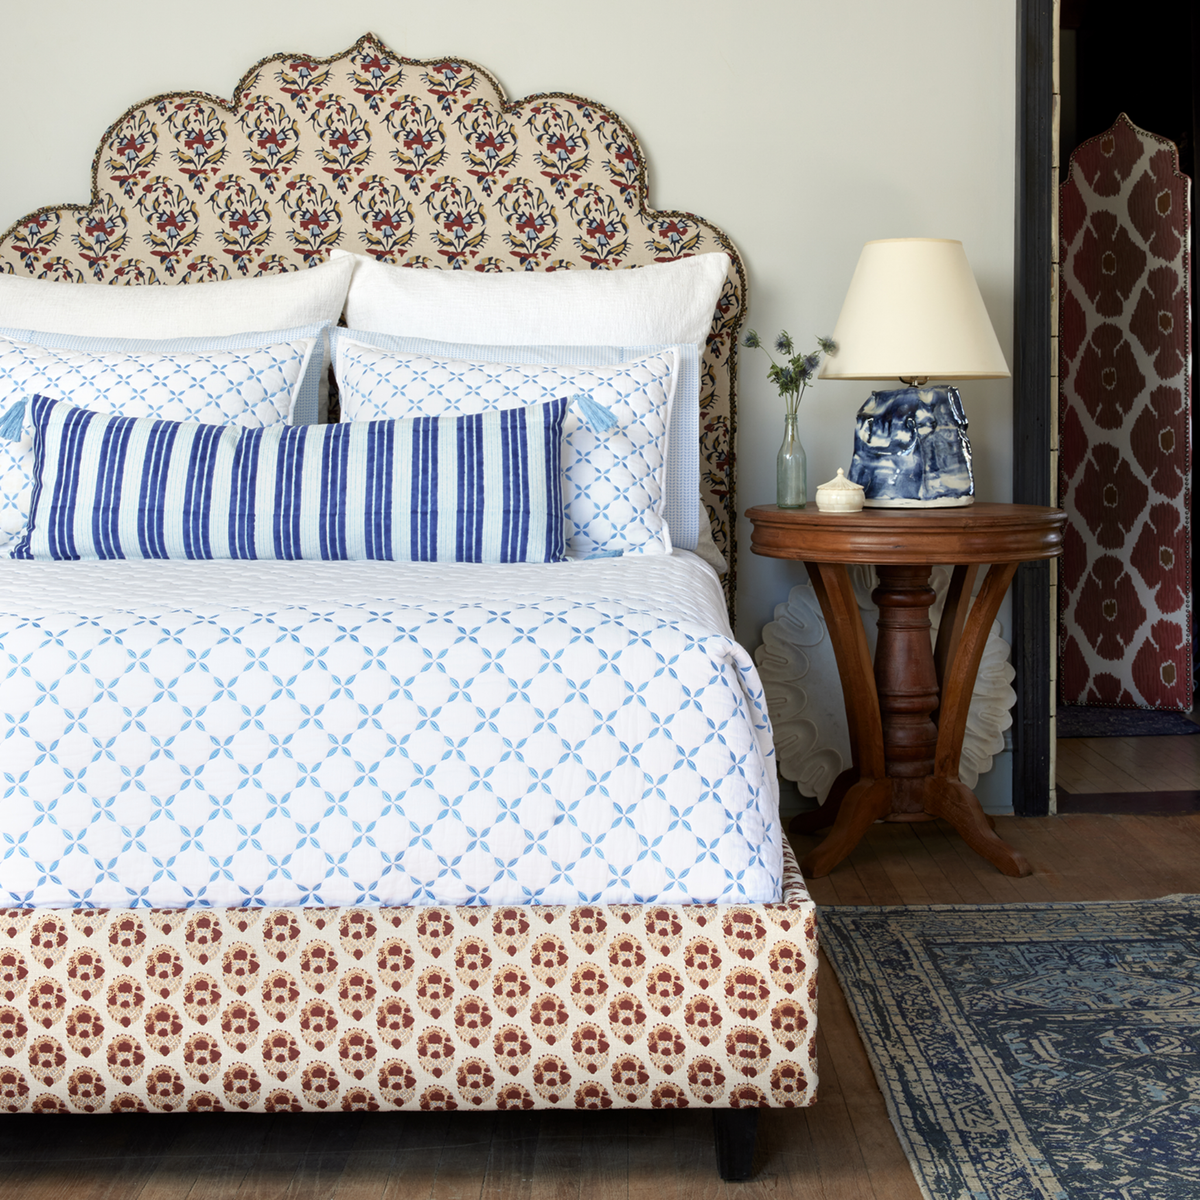 Full Bedding in John Robshaw Layla Quilts and Shams in Azure Color